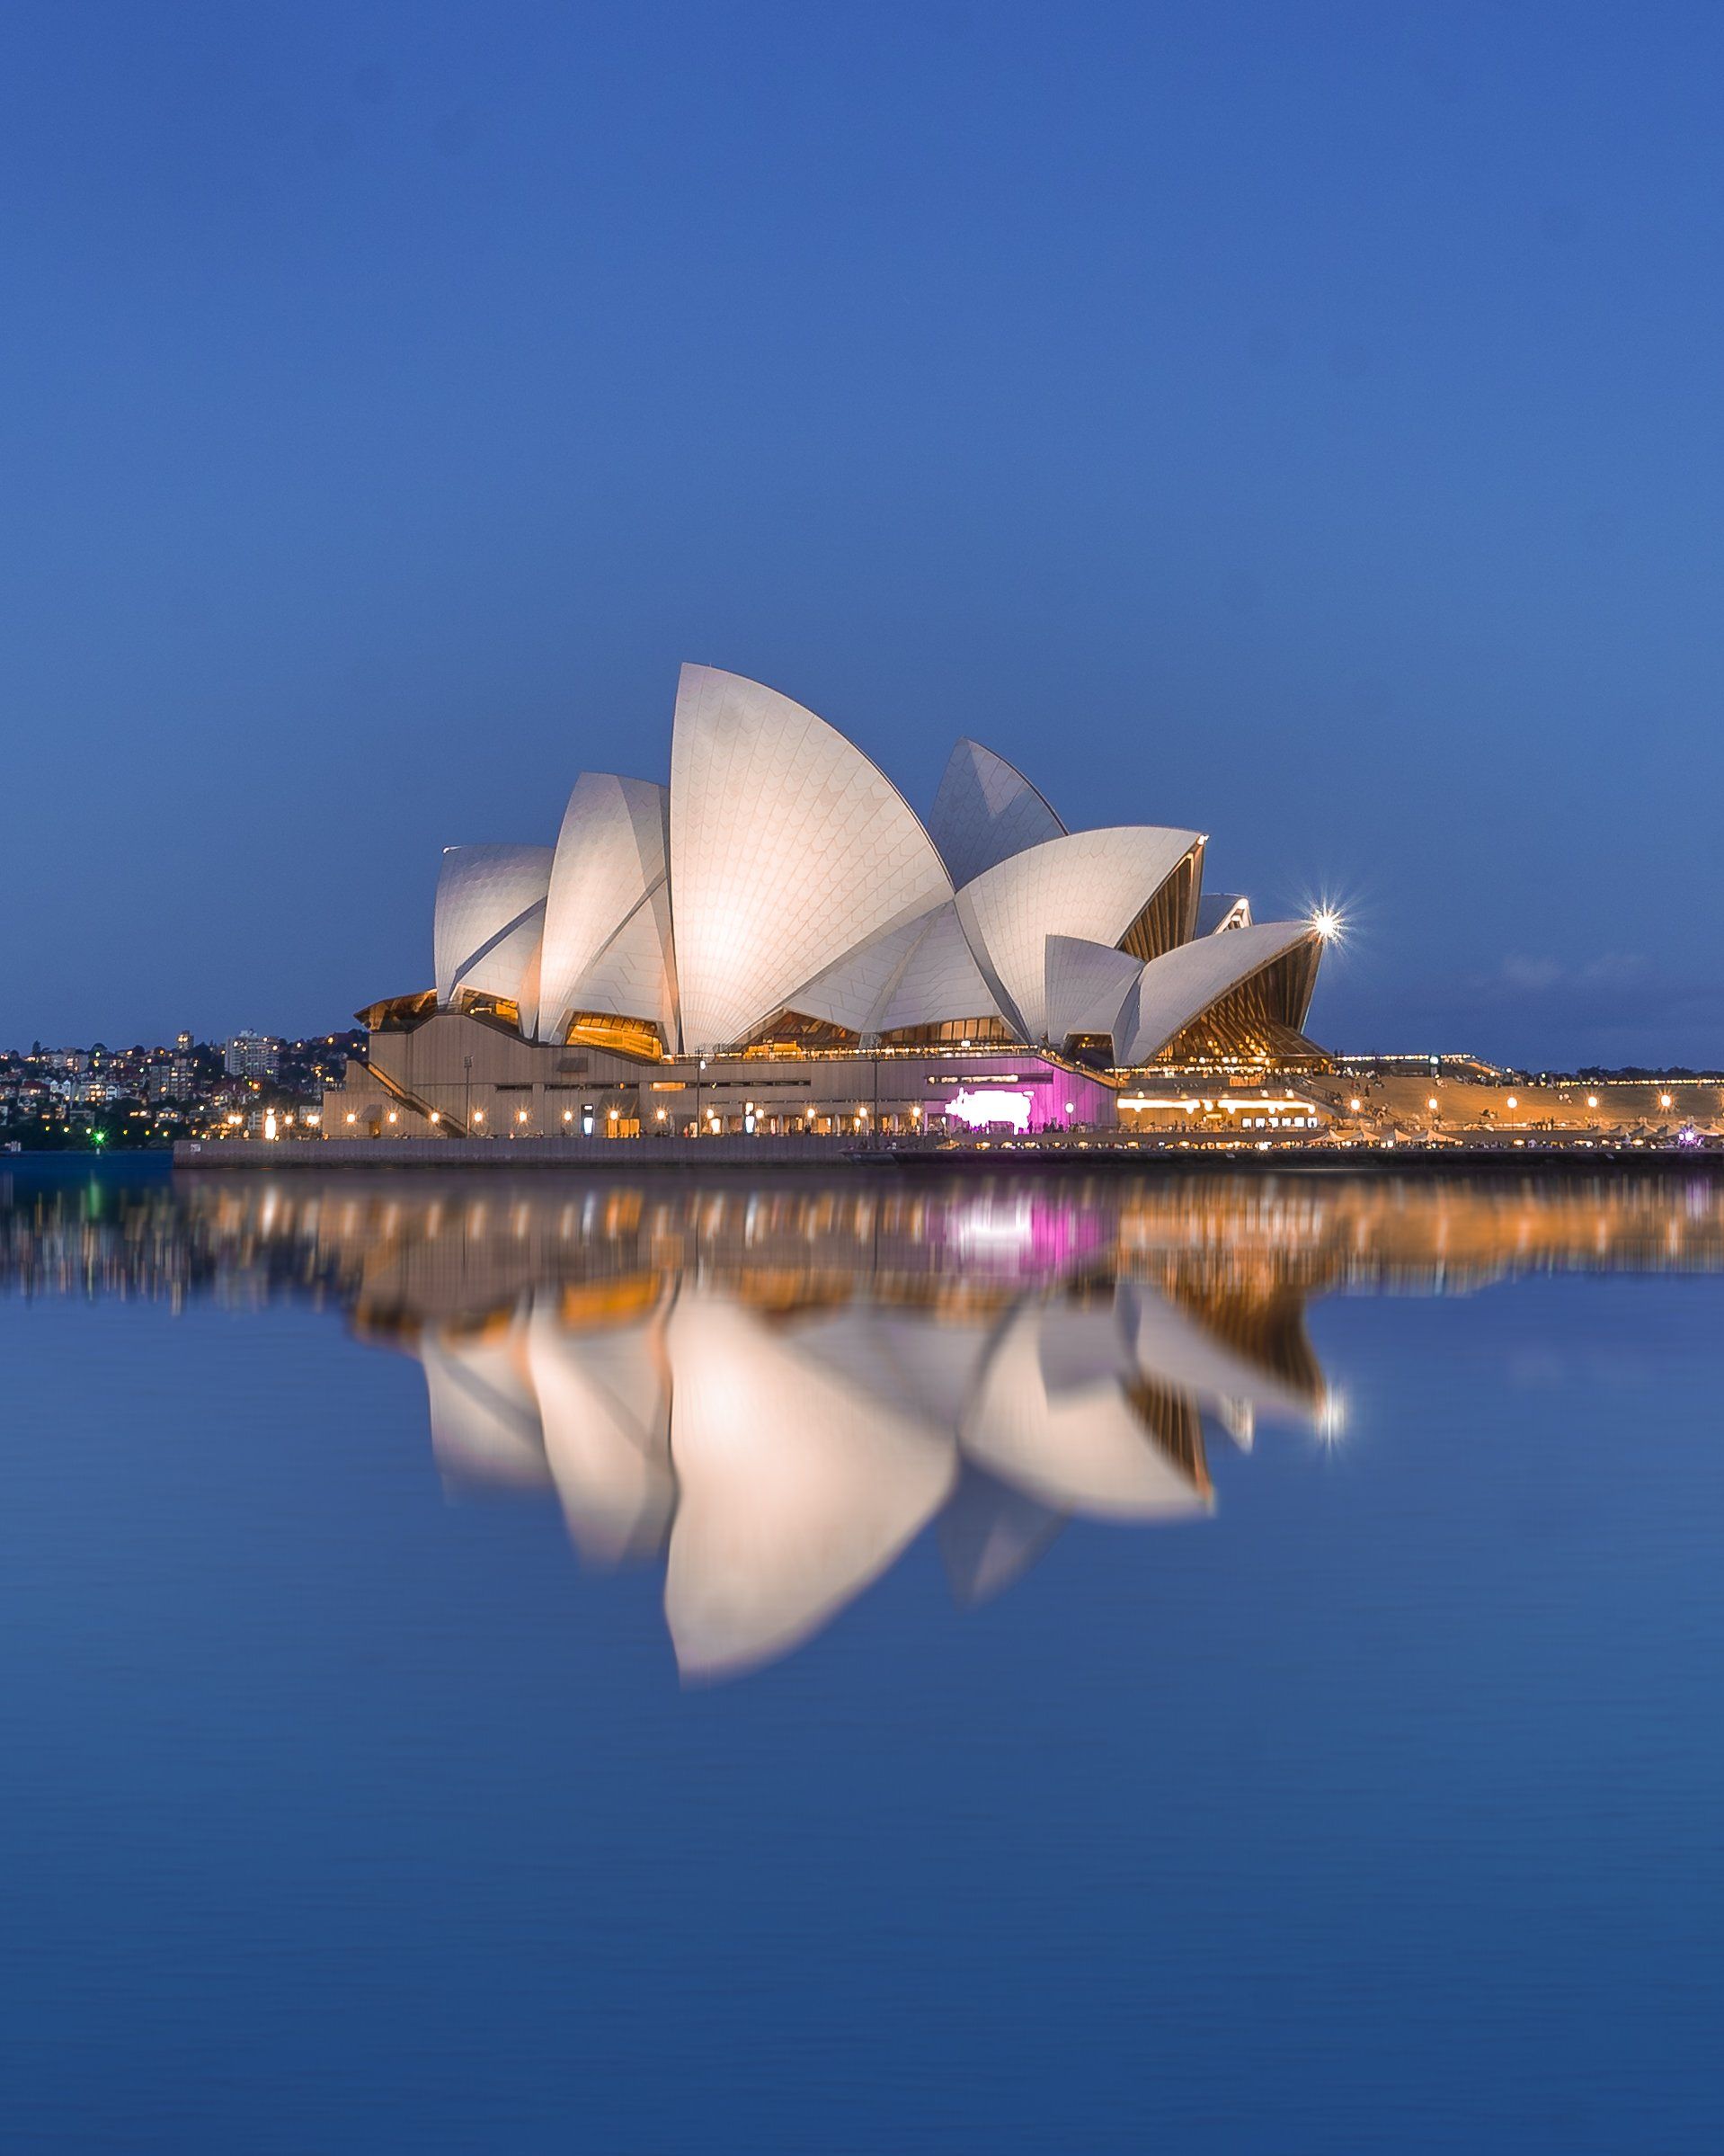 The sydney opera house is reflected in the water at night